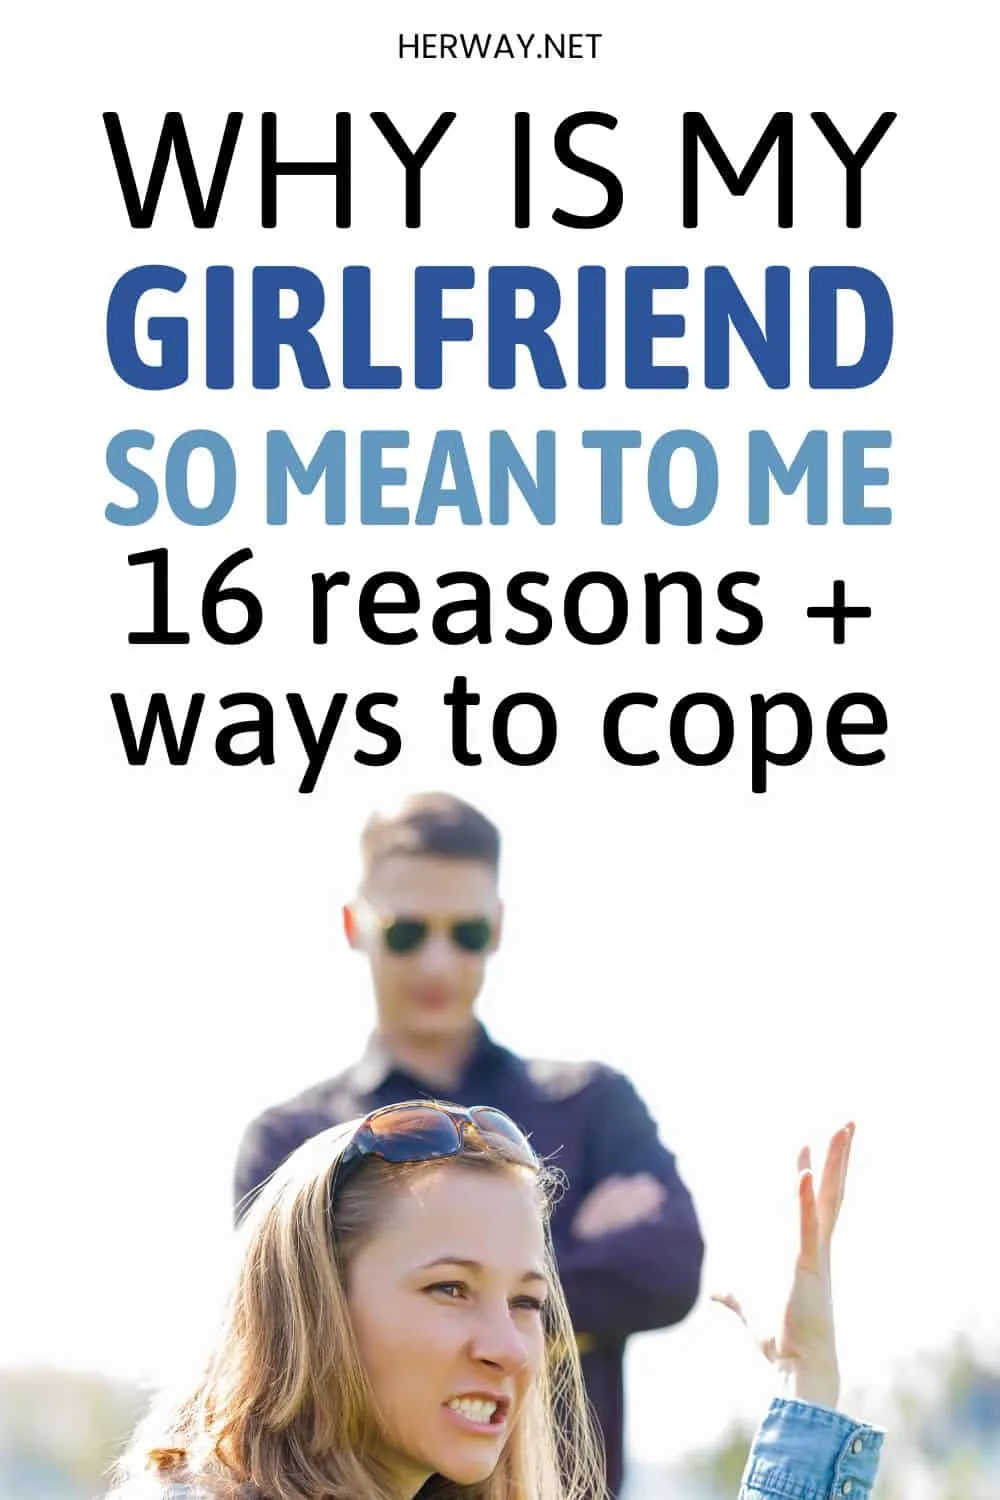 Why Is My Girlfriend So Mean To Me (16 Reasons + Ways To Cope) Pinterest